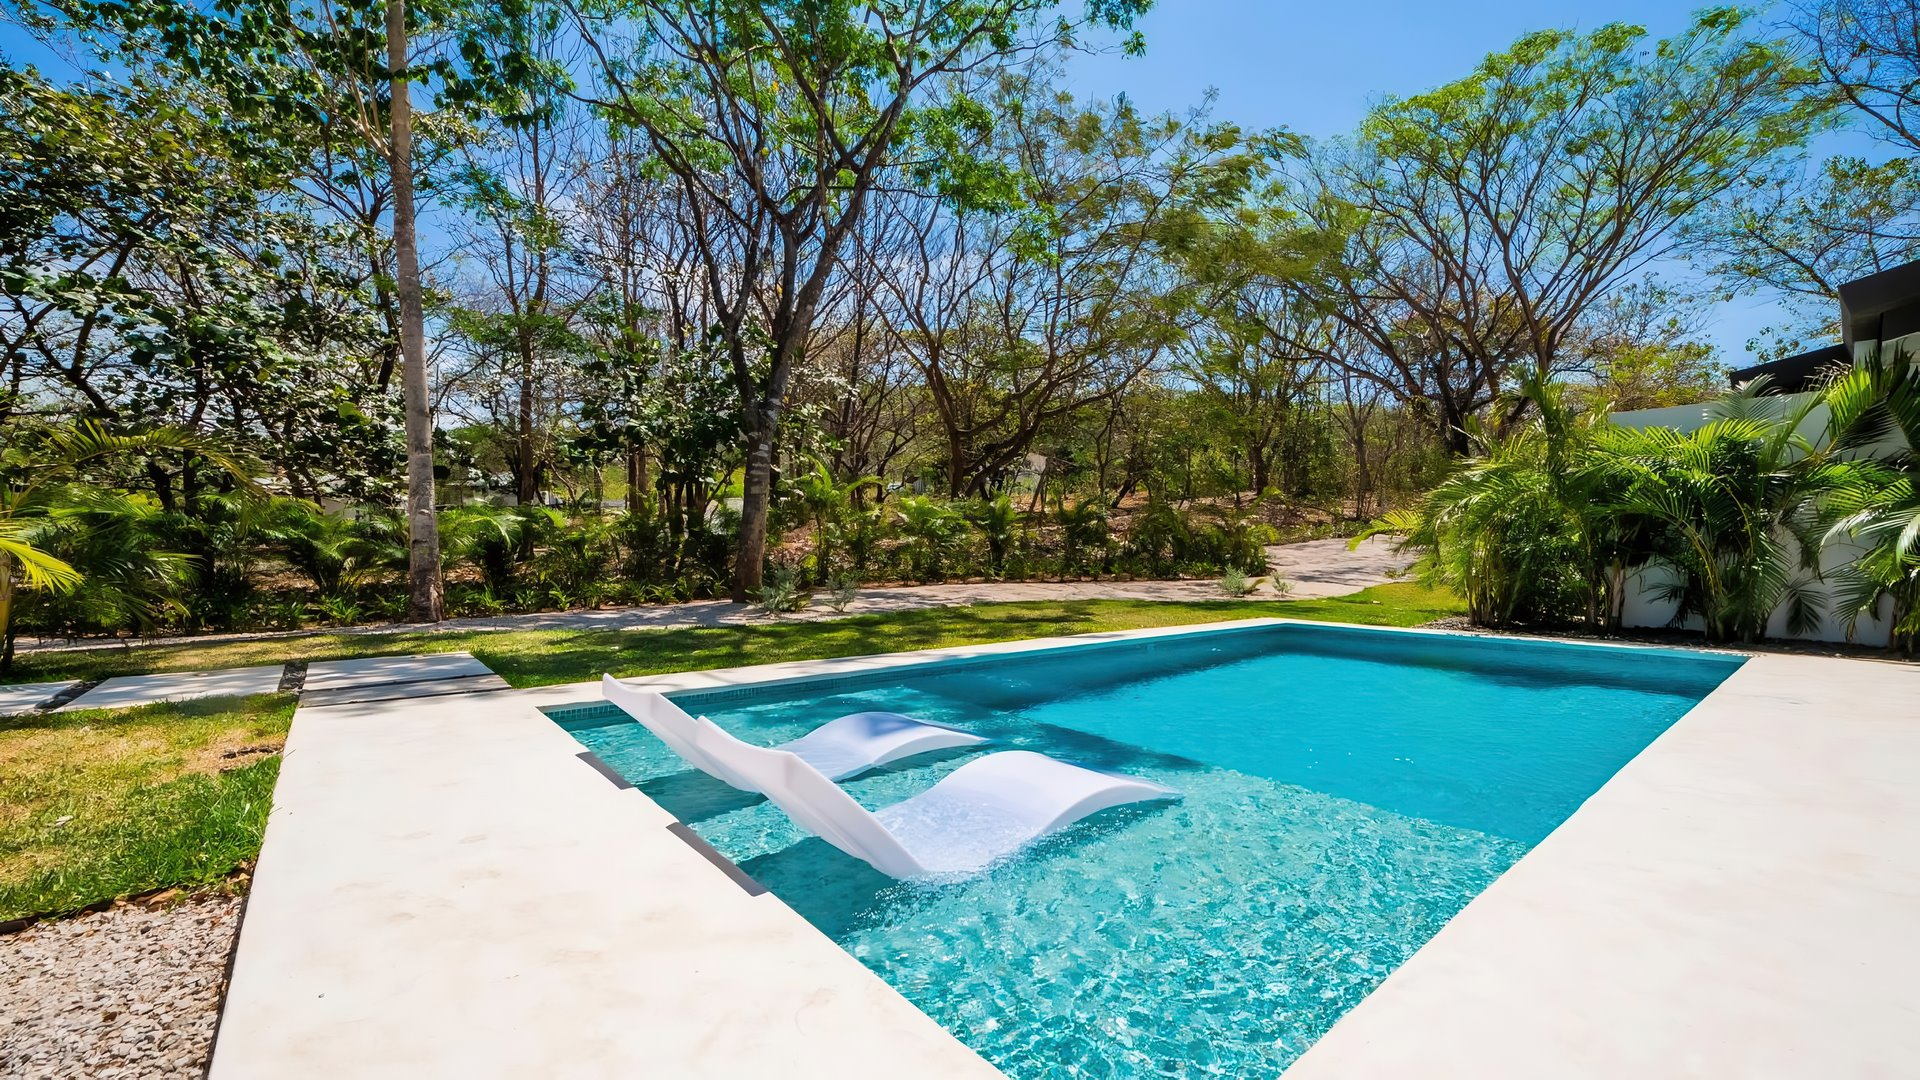 9932-The lovely pool of the home within a five-minute drive of Tamarindo, Costa Rica